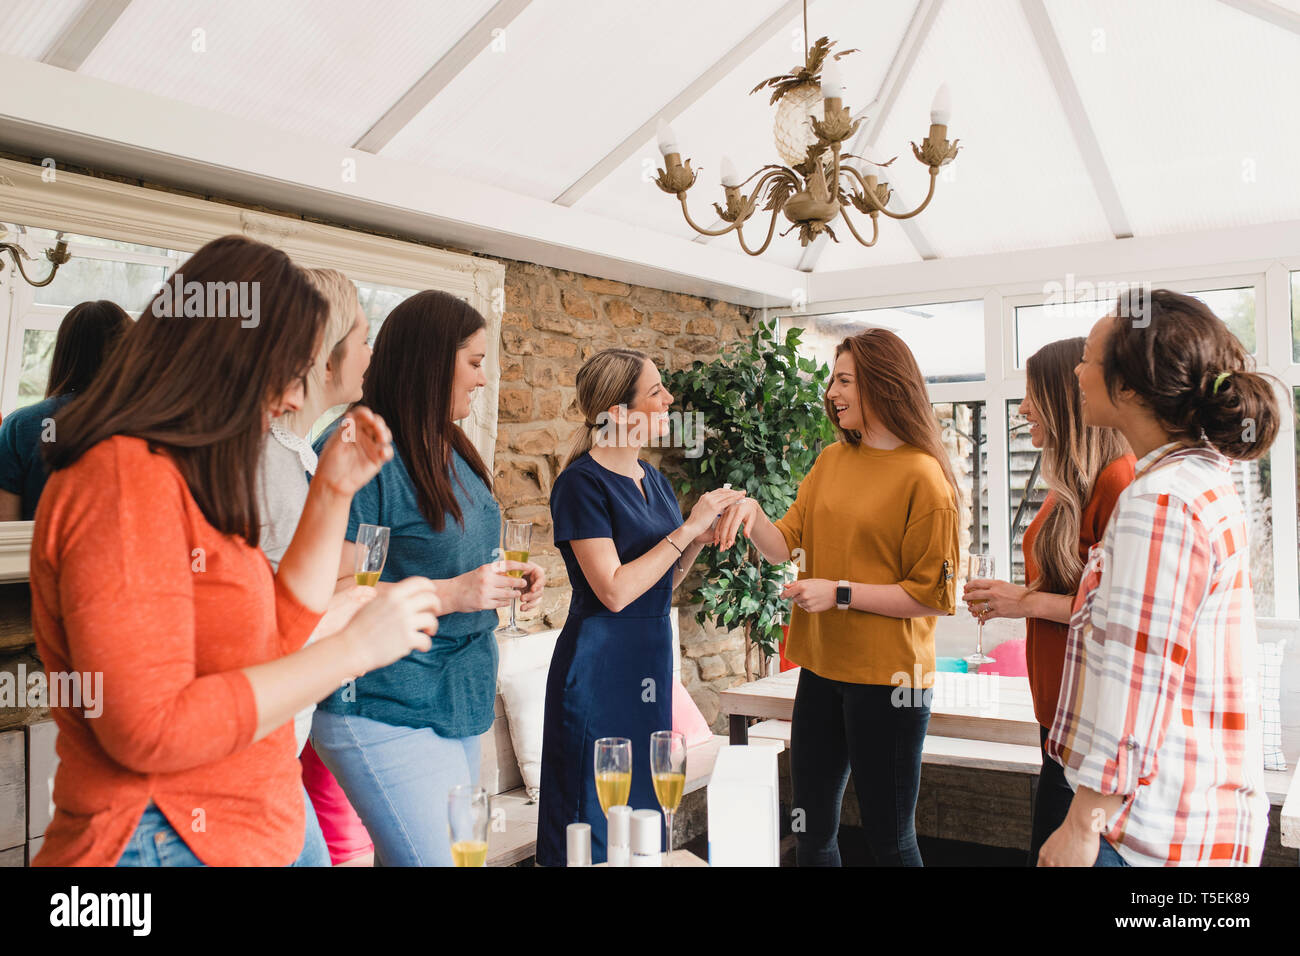 Small group of women with a mixed age range at a beauty product party. The beauty product sales representative is standing talking about the products. Stock Photo